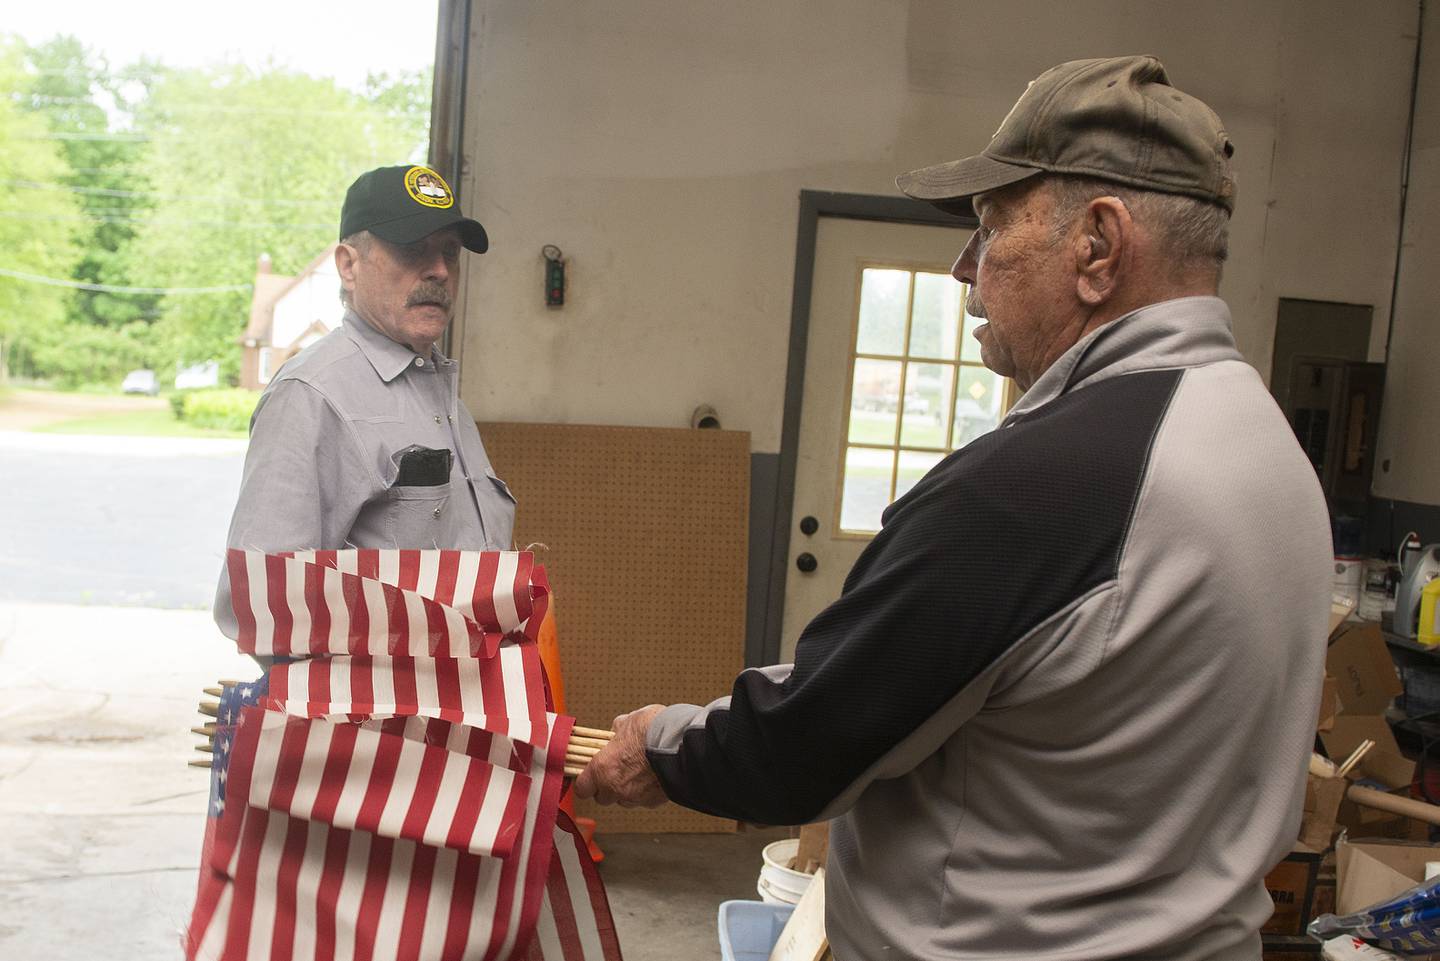 Hudson (left) and Al Wikoff prepare flags to be unfurled later in the day in recognition of Memorial Day.